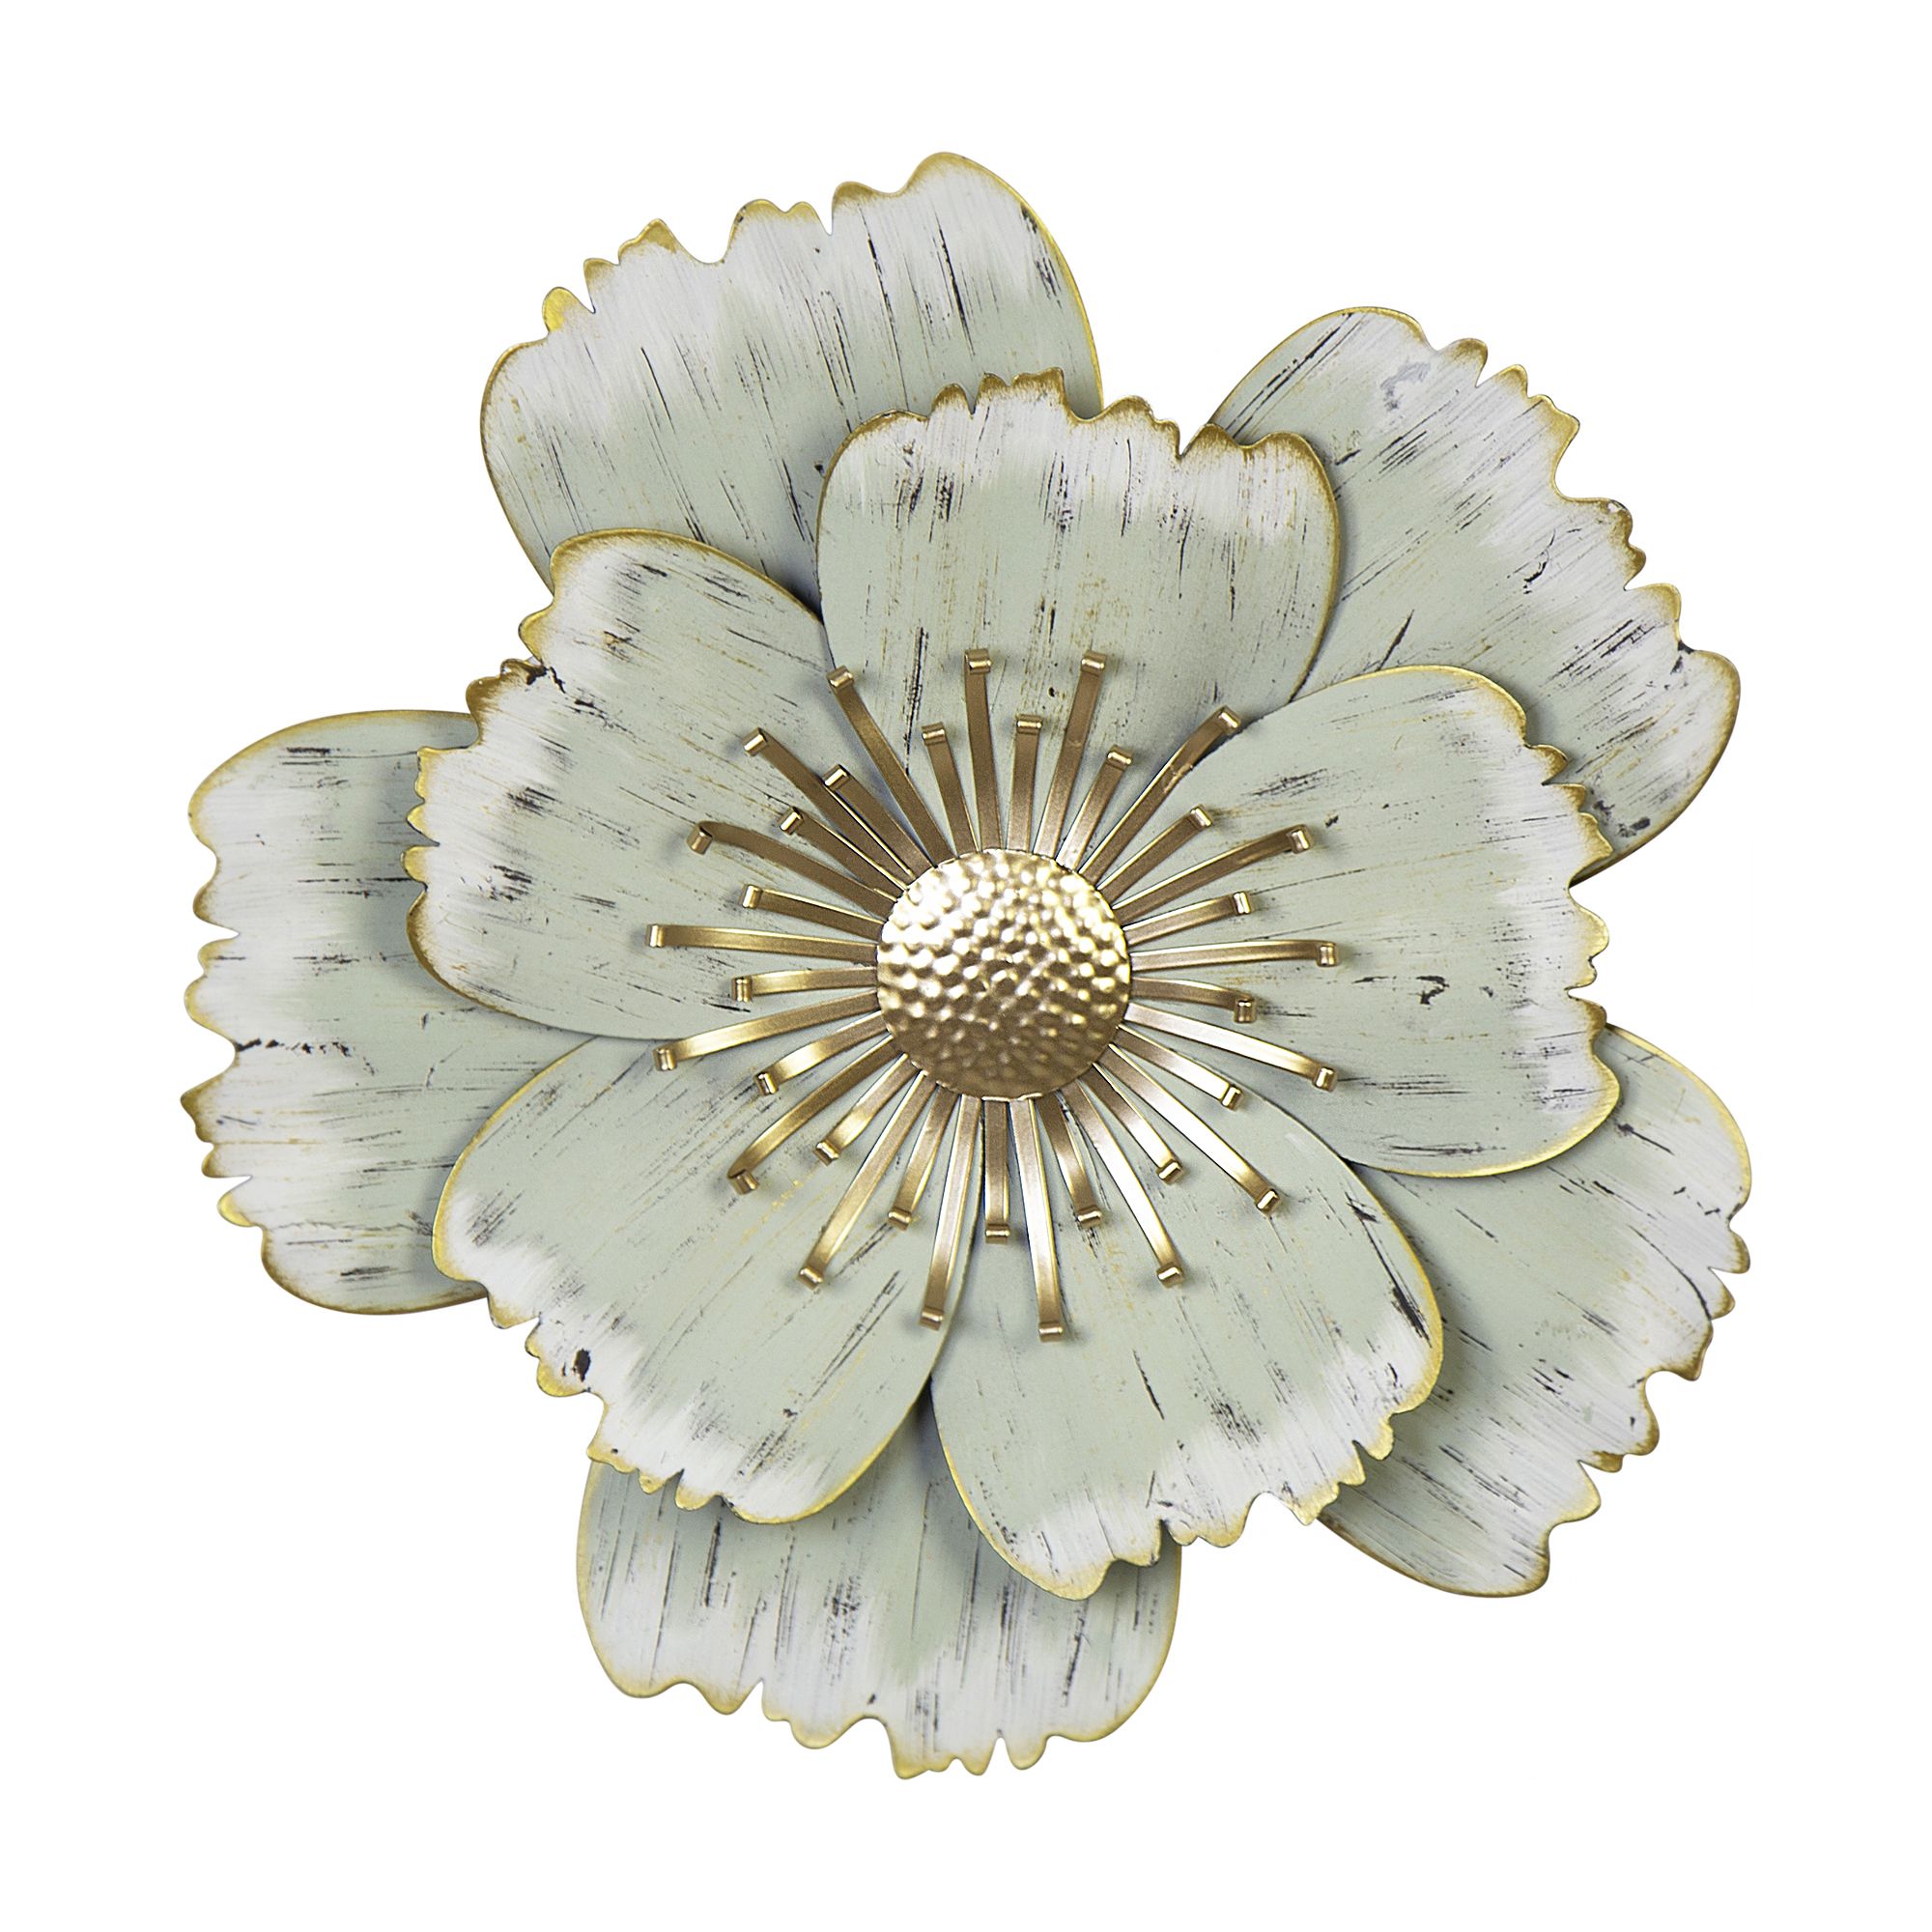 Stratton Home Decor Layered Green Metal Flower Wall Decor – Walmart For Latest Crestview Bloom Wall Art (View 13 of 20)